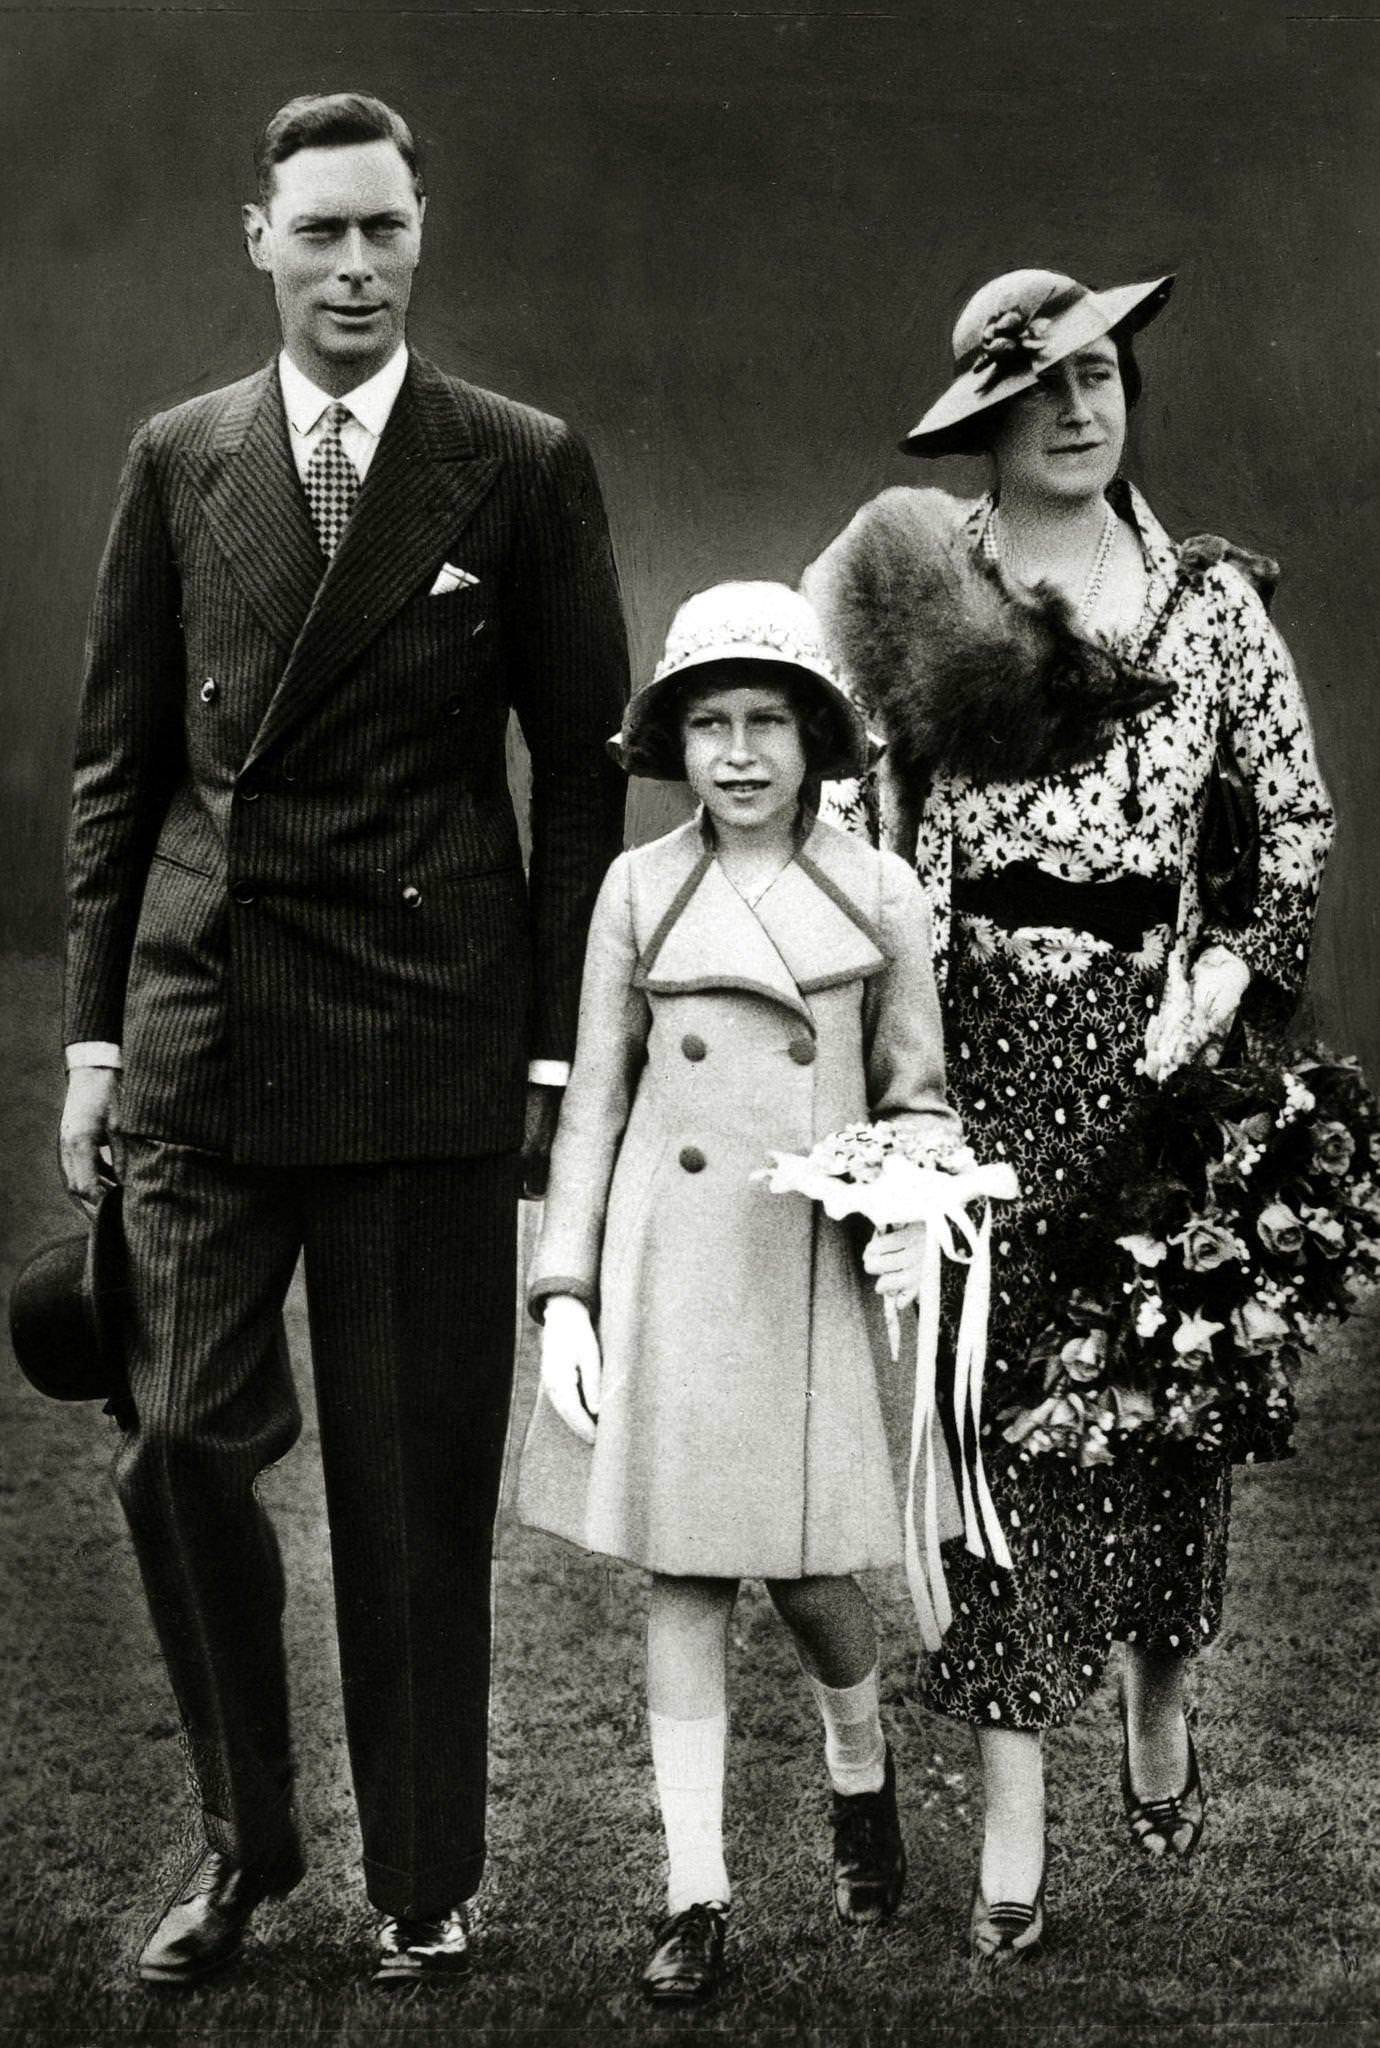 The Duke and Duchess of York with their daughter Princess Elizabeth. The Duke of York became King George VI in 1936 on the abdication of his brother King Edward VIII.